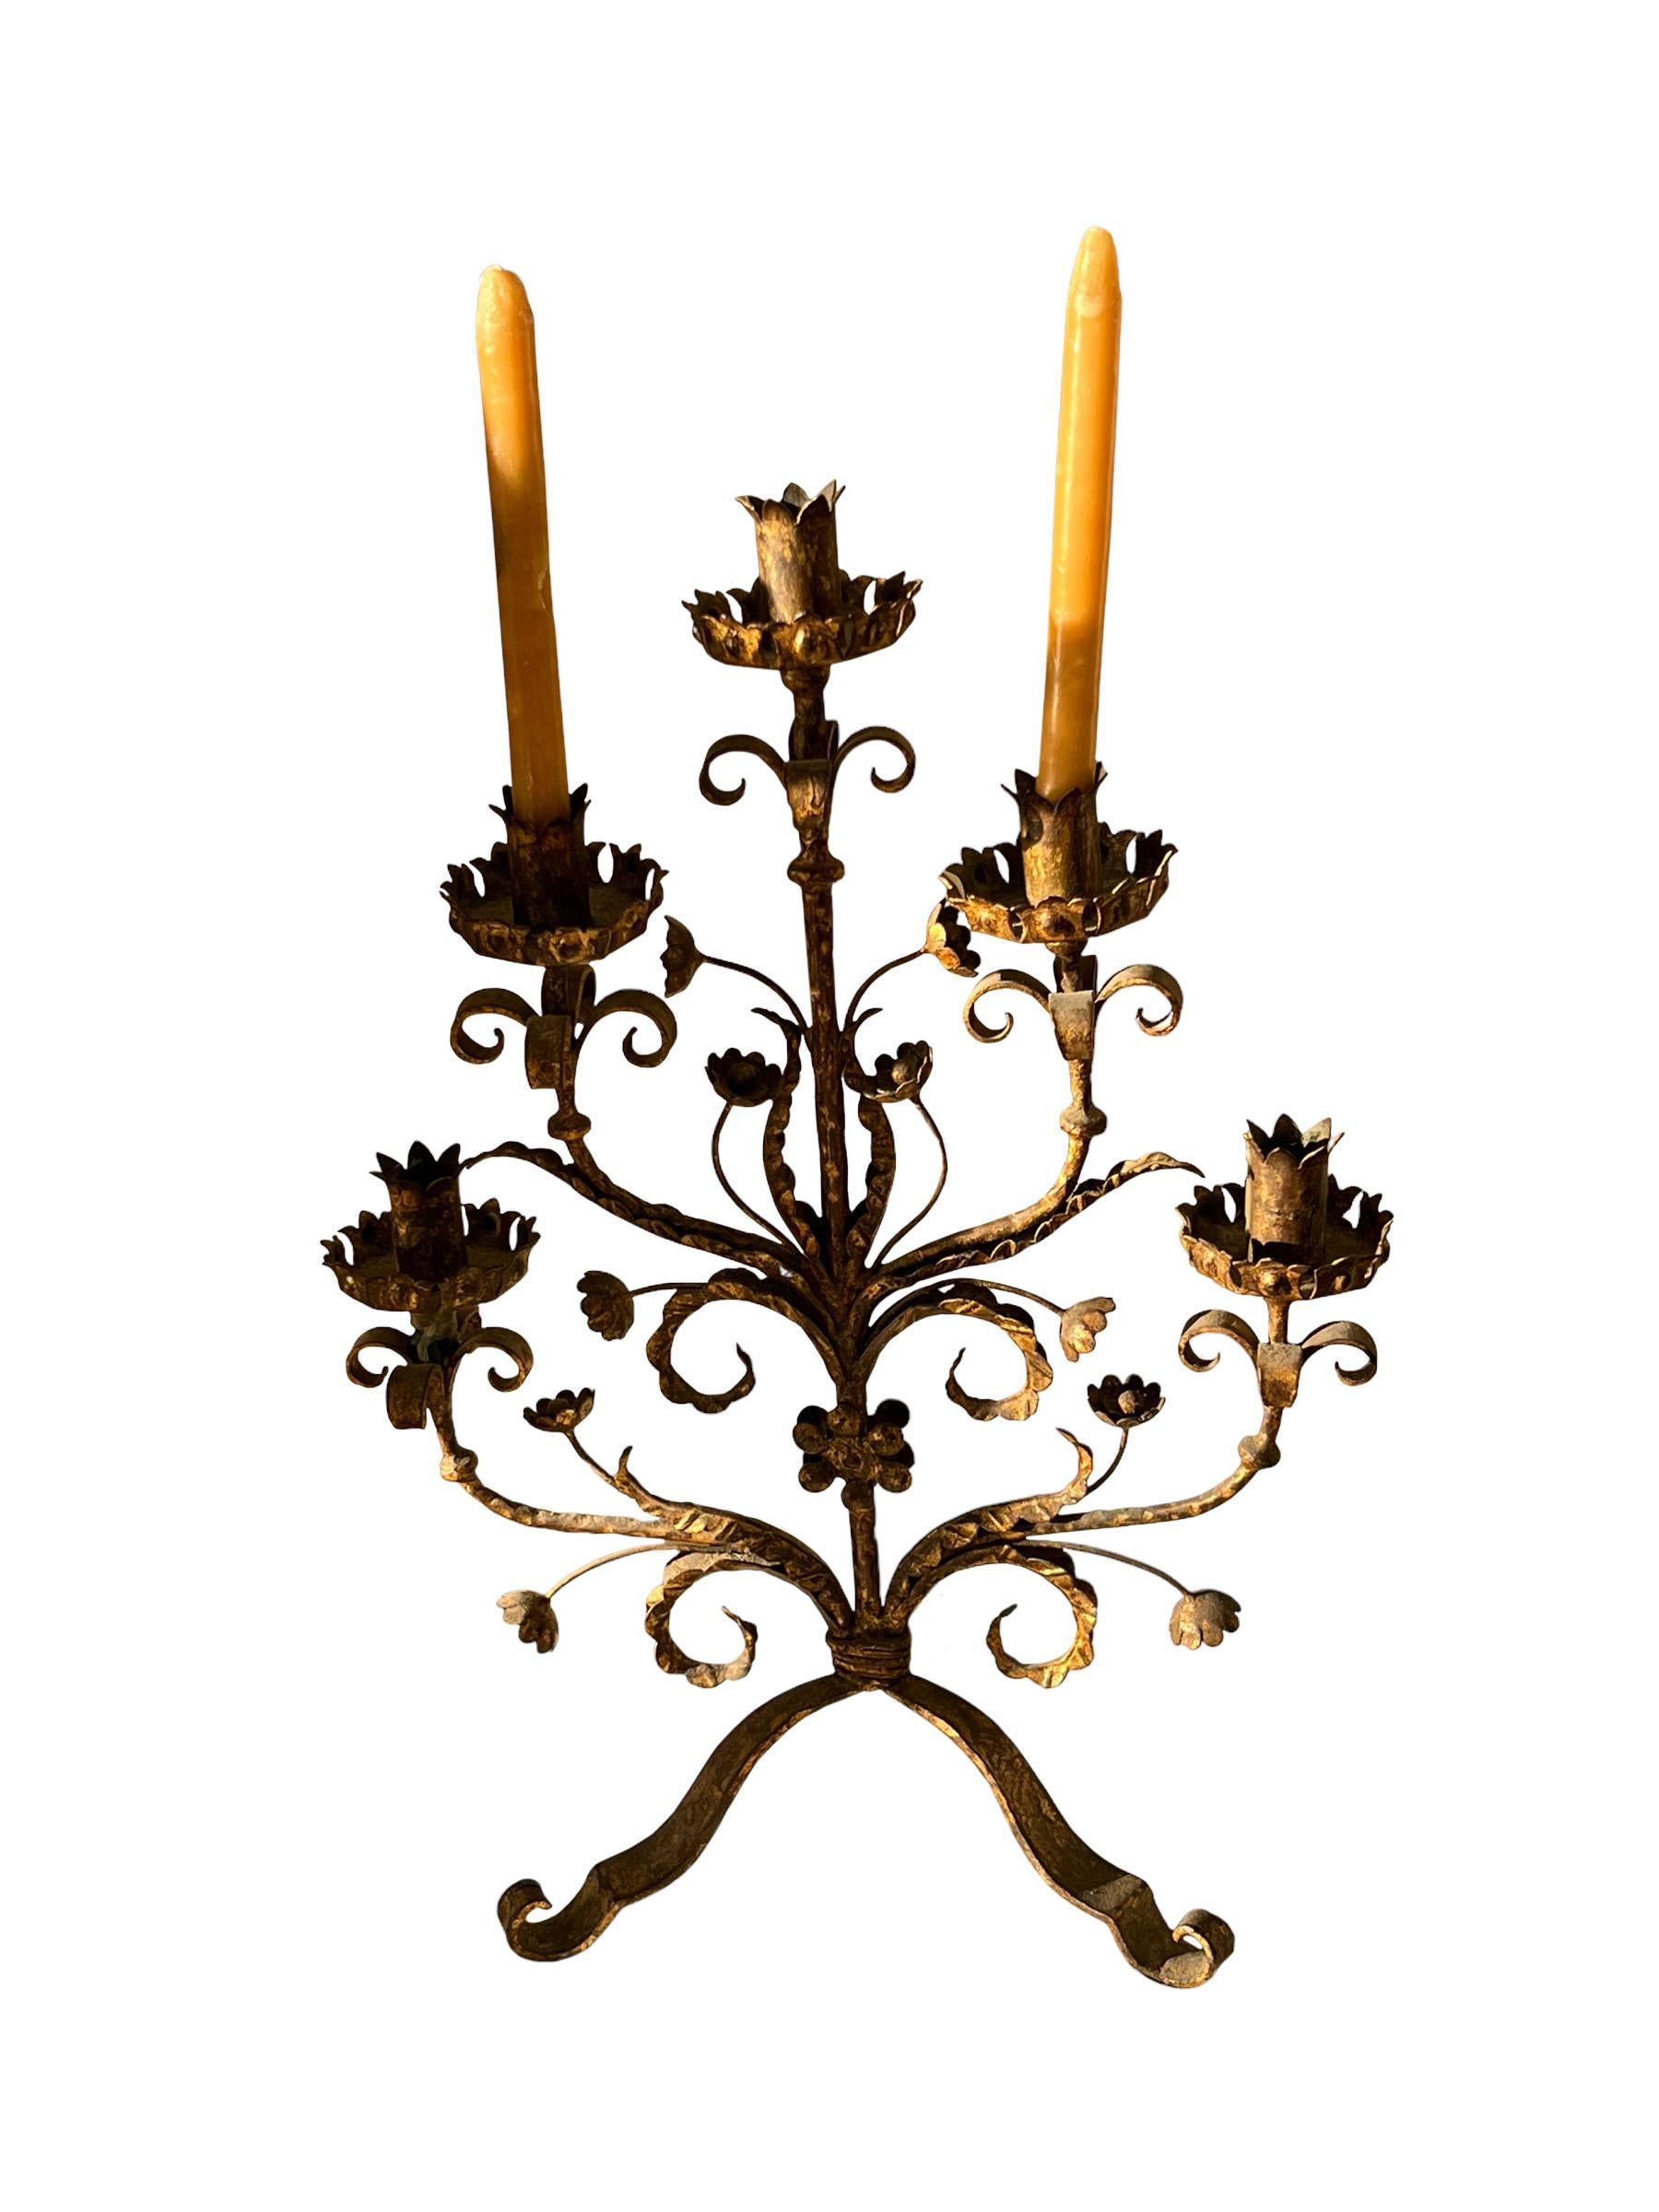 A wonderful large 19th century five arm tole candelabra. Candelabra stands on three legs with a whimsical floral motif throughout.